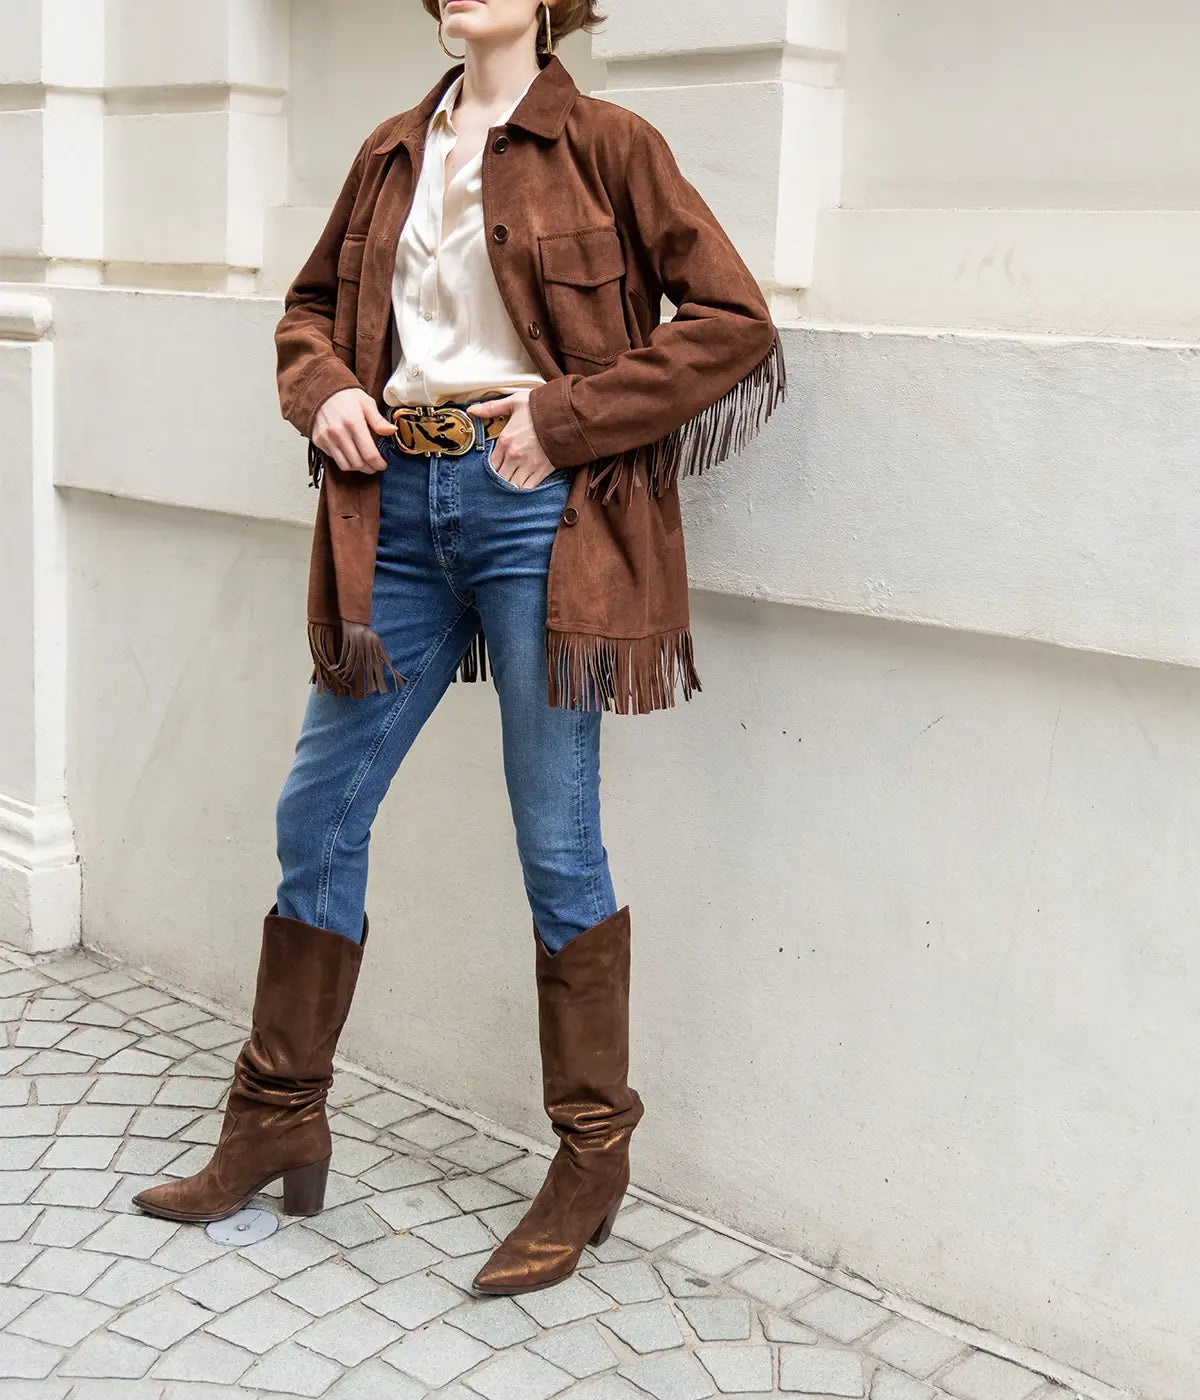 A western style jacket made from 100% lamb leather. With tassel detailing, long sleeves and button down detailing. Leather Jacket, Western Style, Elevated basic, comfortable, trans seasonal, made in Italy. 